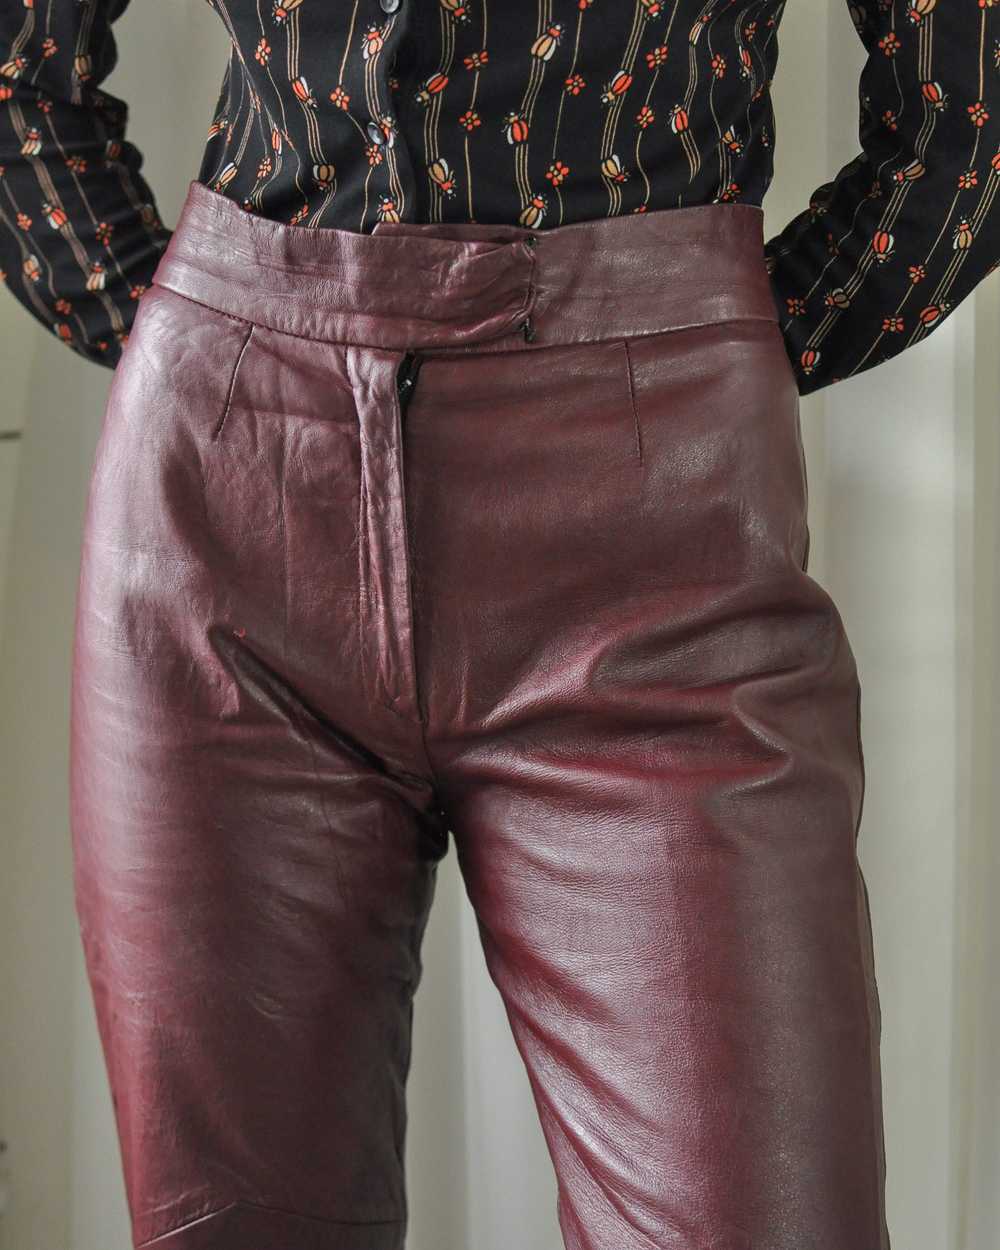 70s Burgundy Leather Pant Suit - image 6